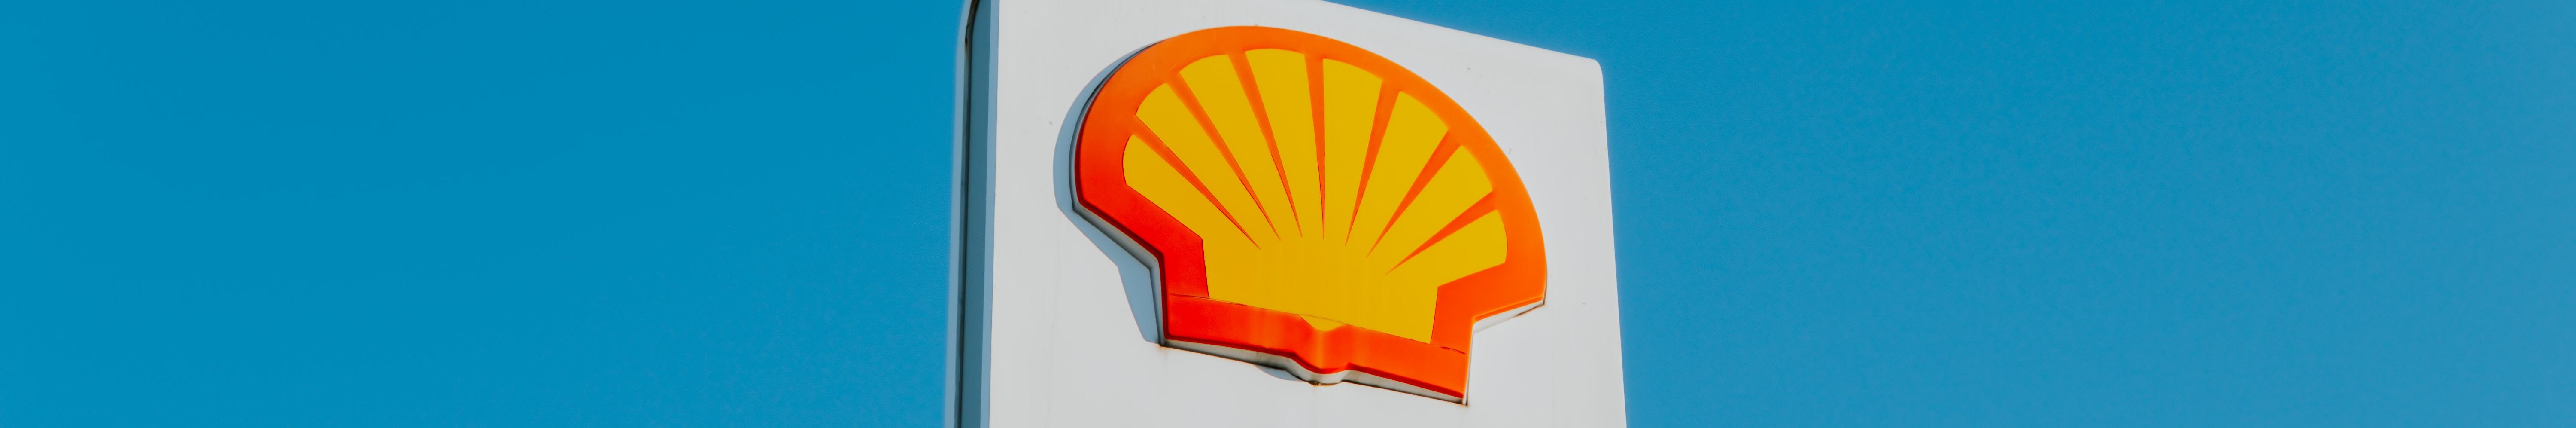 Shell PLC reported 8 fatalities and 133 incidents in 2021